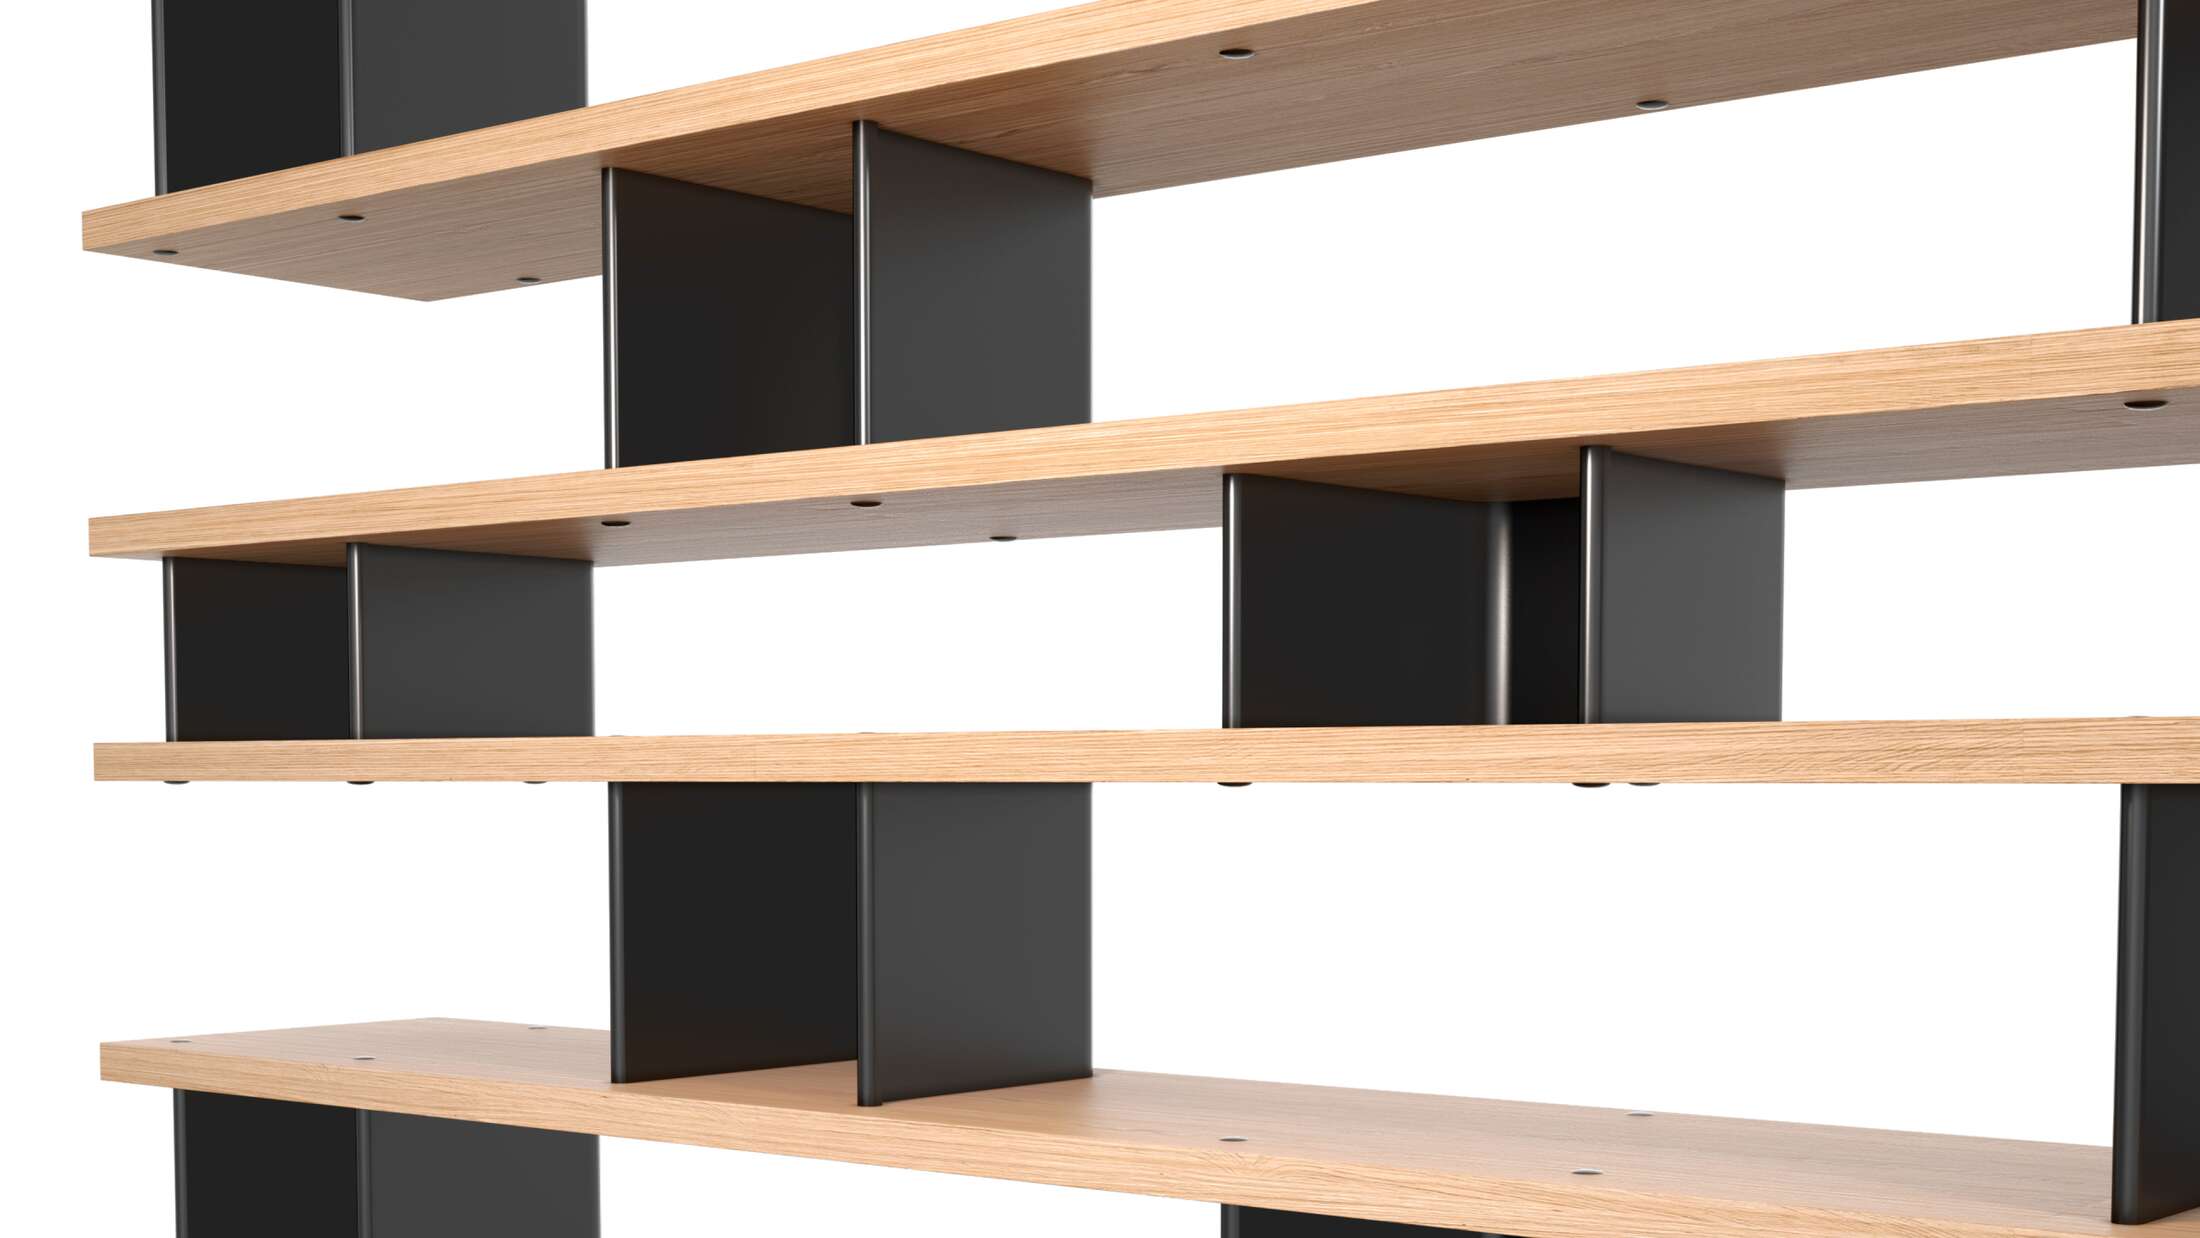 Shelving unit designed by Charlotte Perriand in 1952-56. Relaunched by Cassina in 2012. Manufactured by Cassina in Italy.